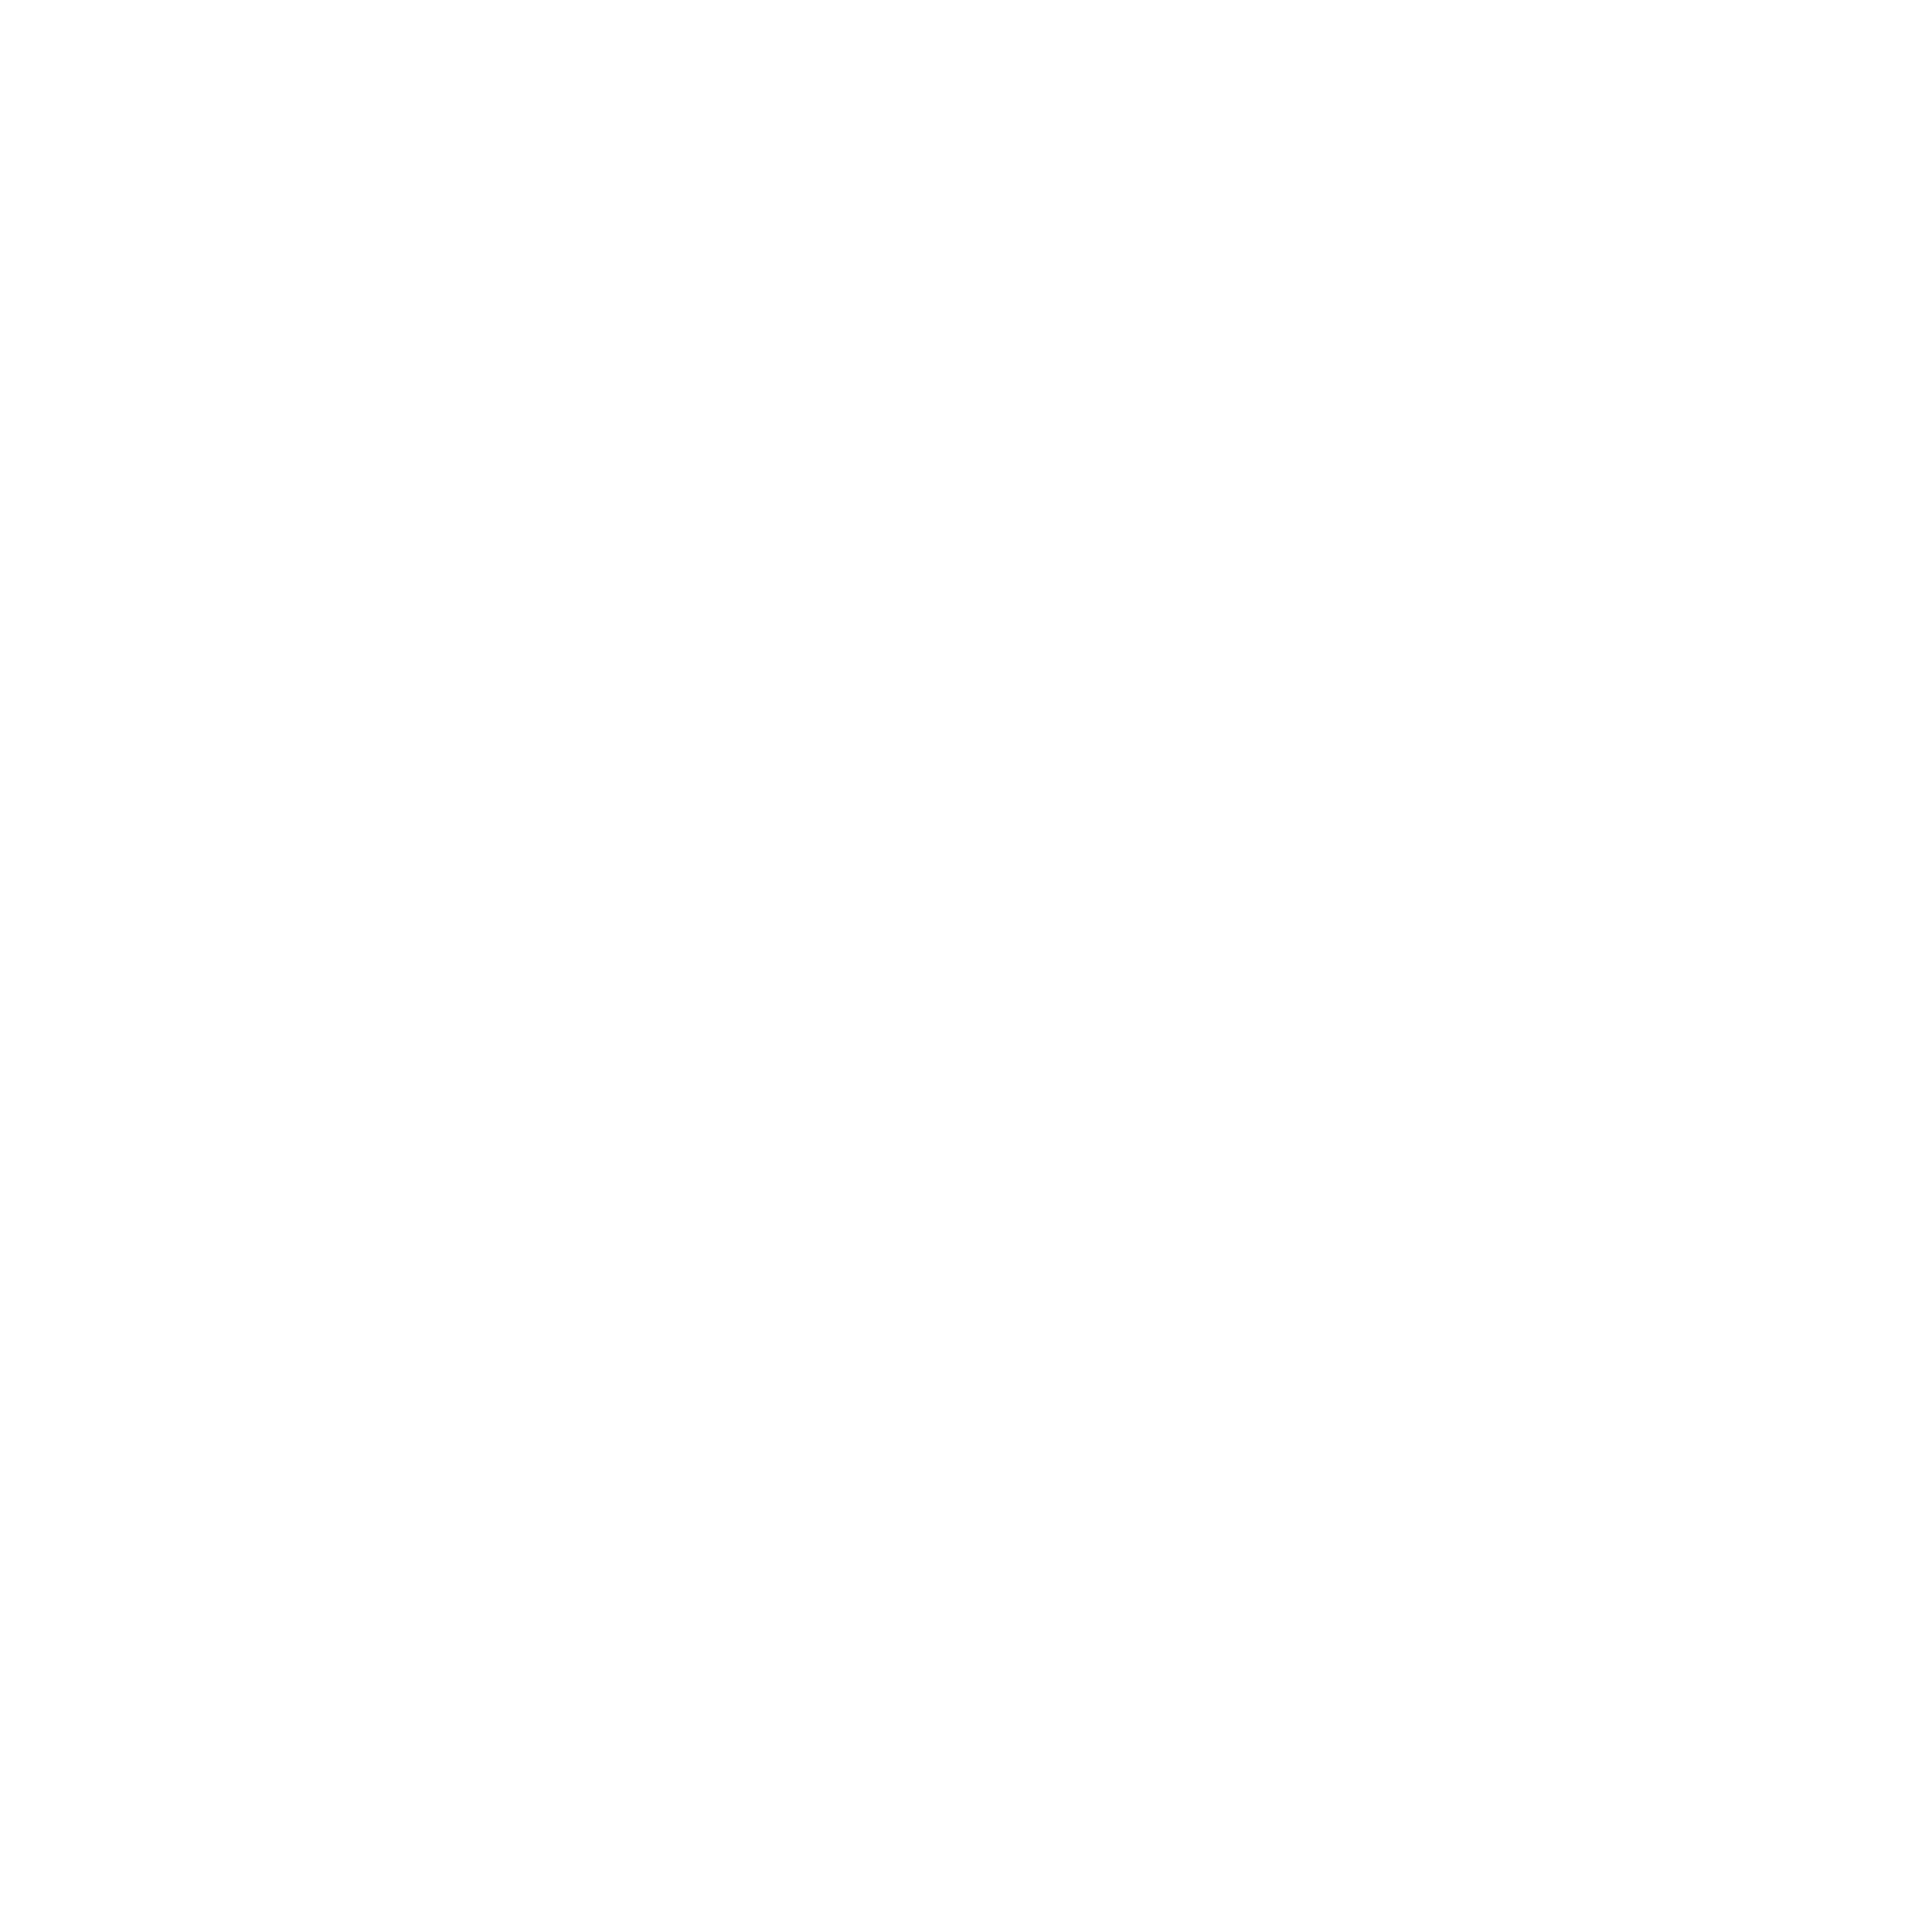 House Offer 365 - House Buyers Houston